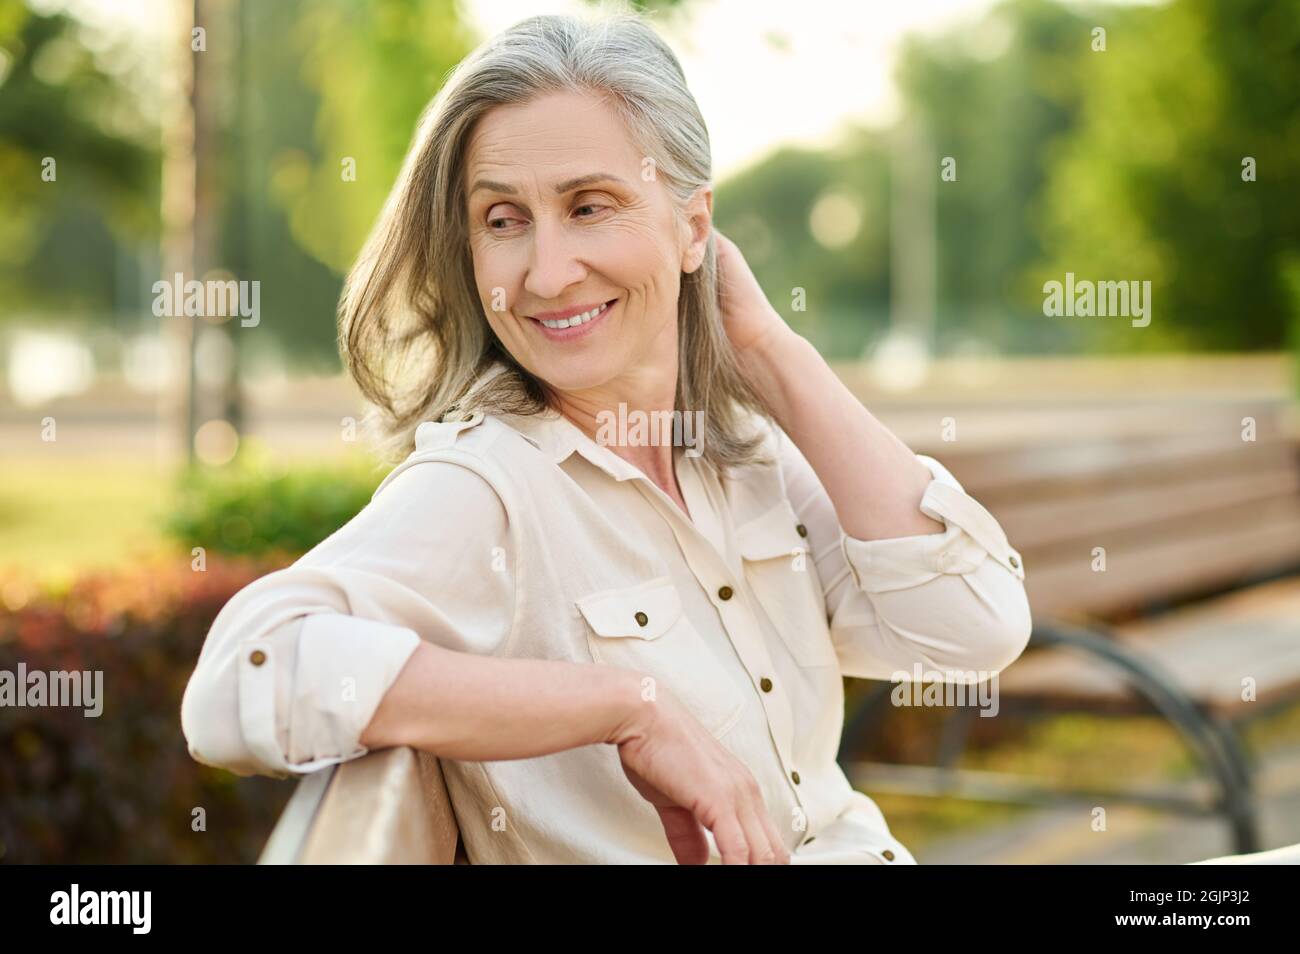 Cheerful cute adult woman sitting on bench Stock Photo